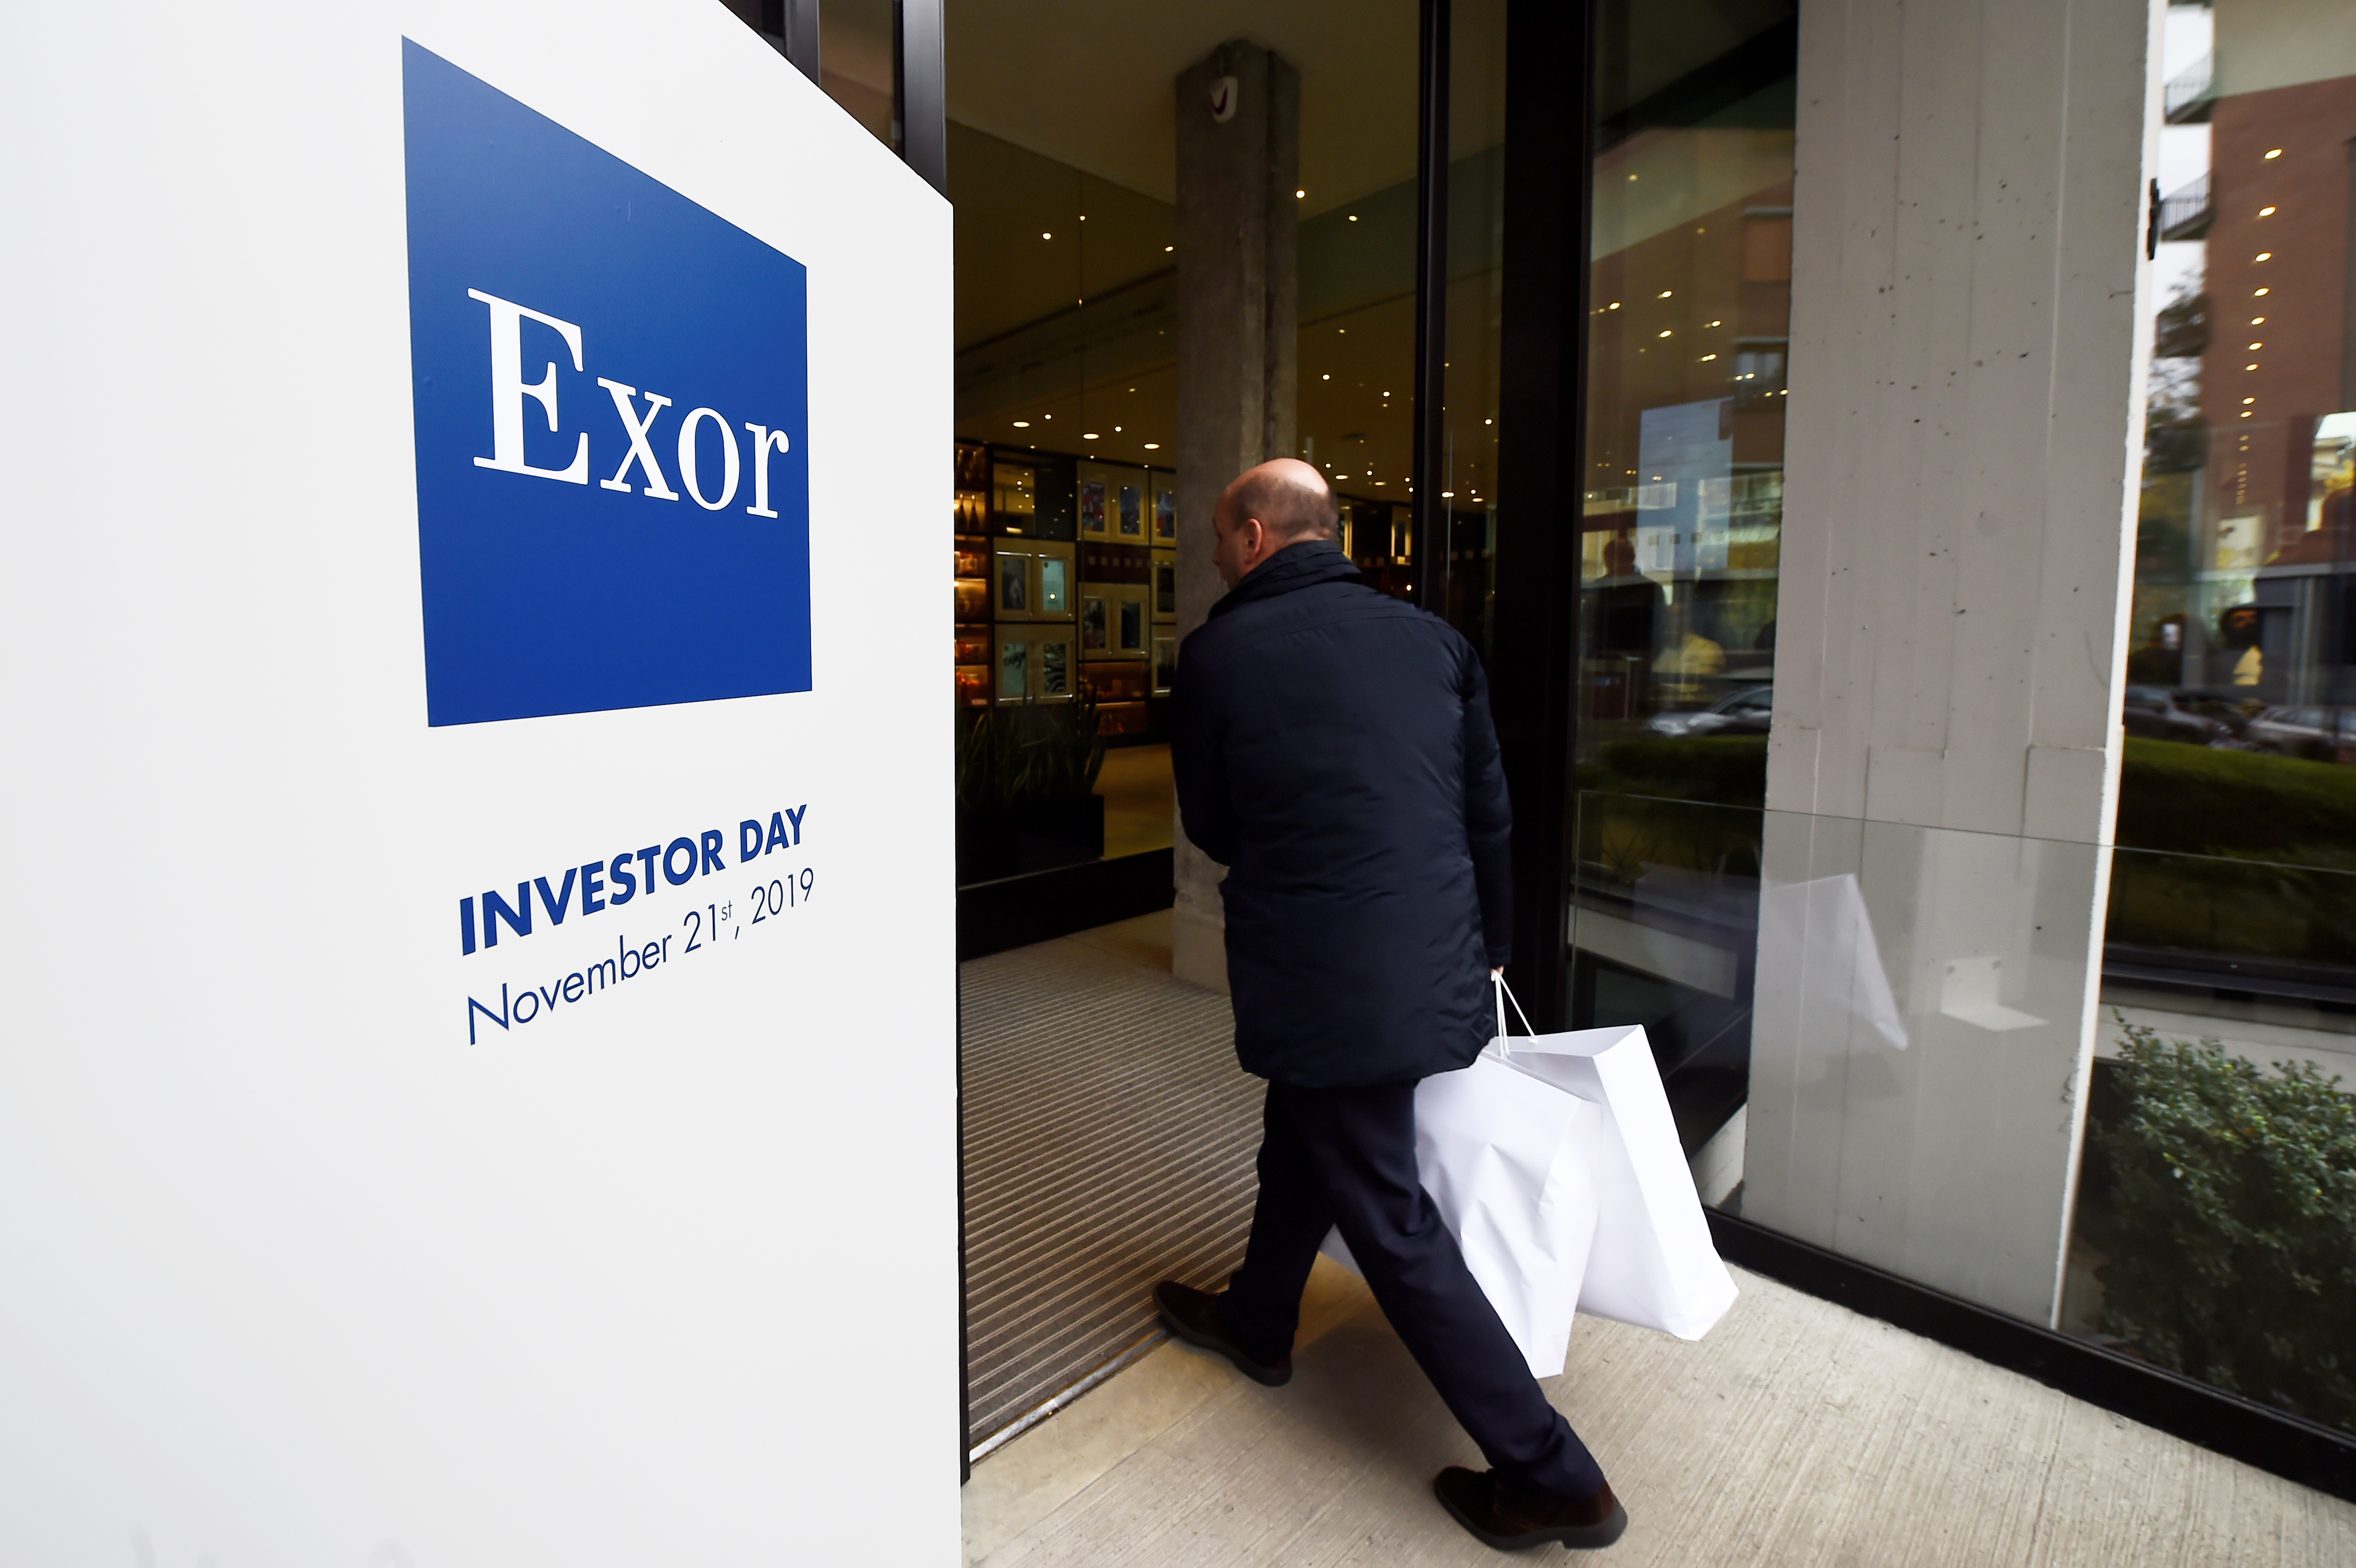 Exor logo is seen on investor day held by holding group in Turin